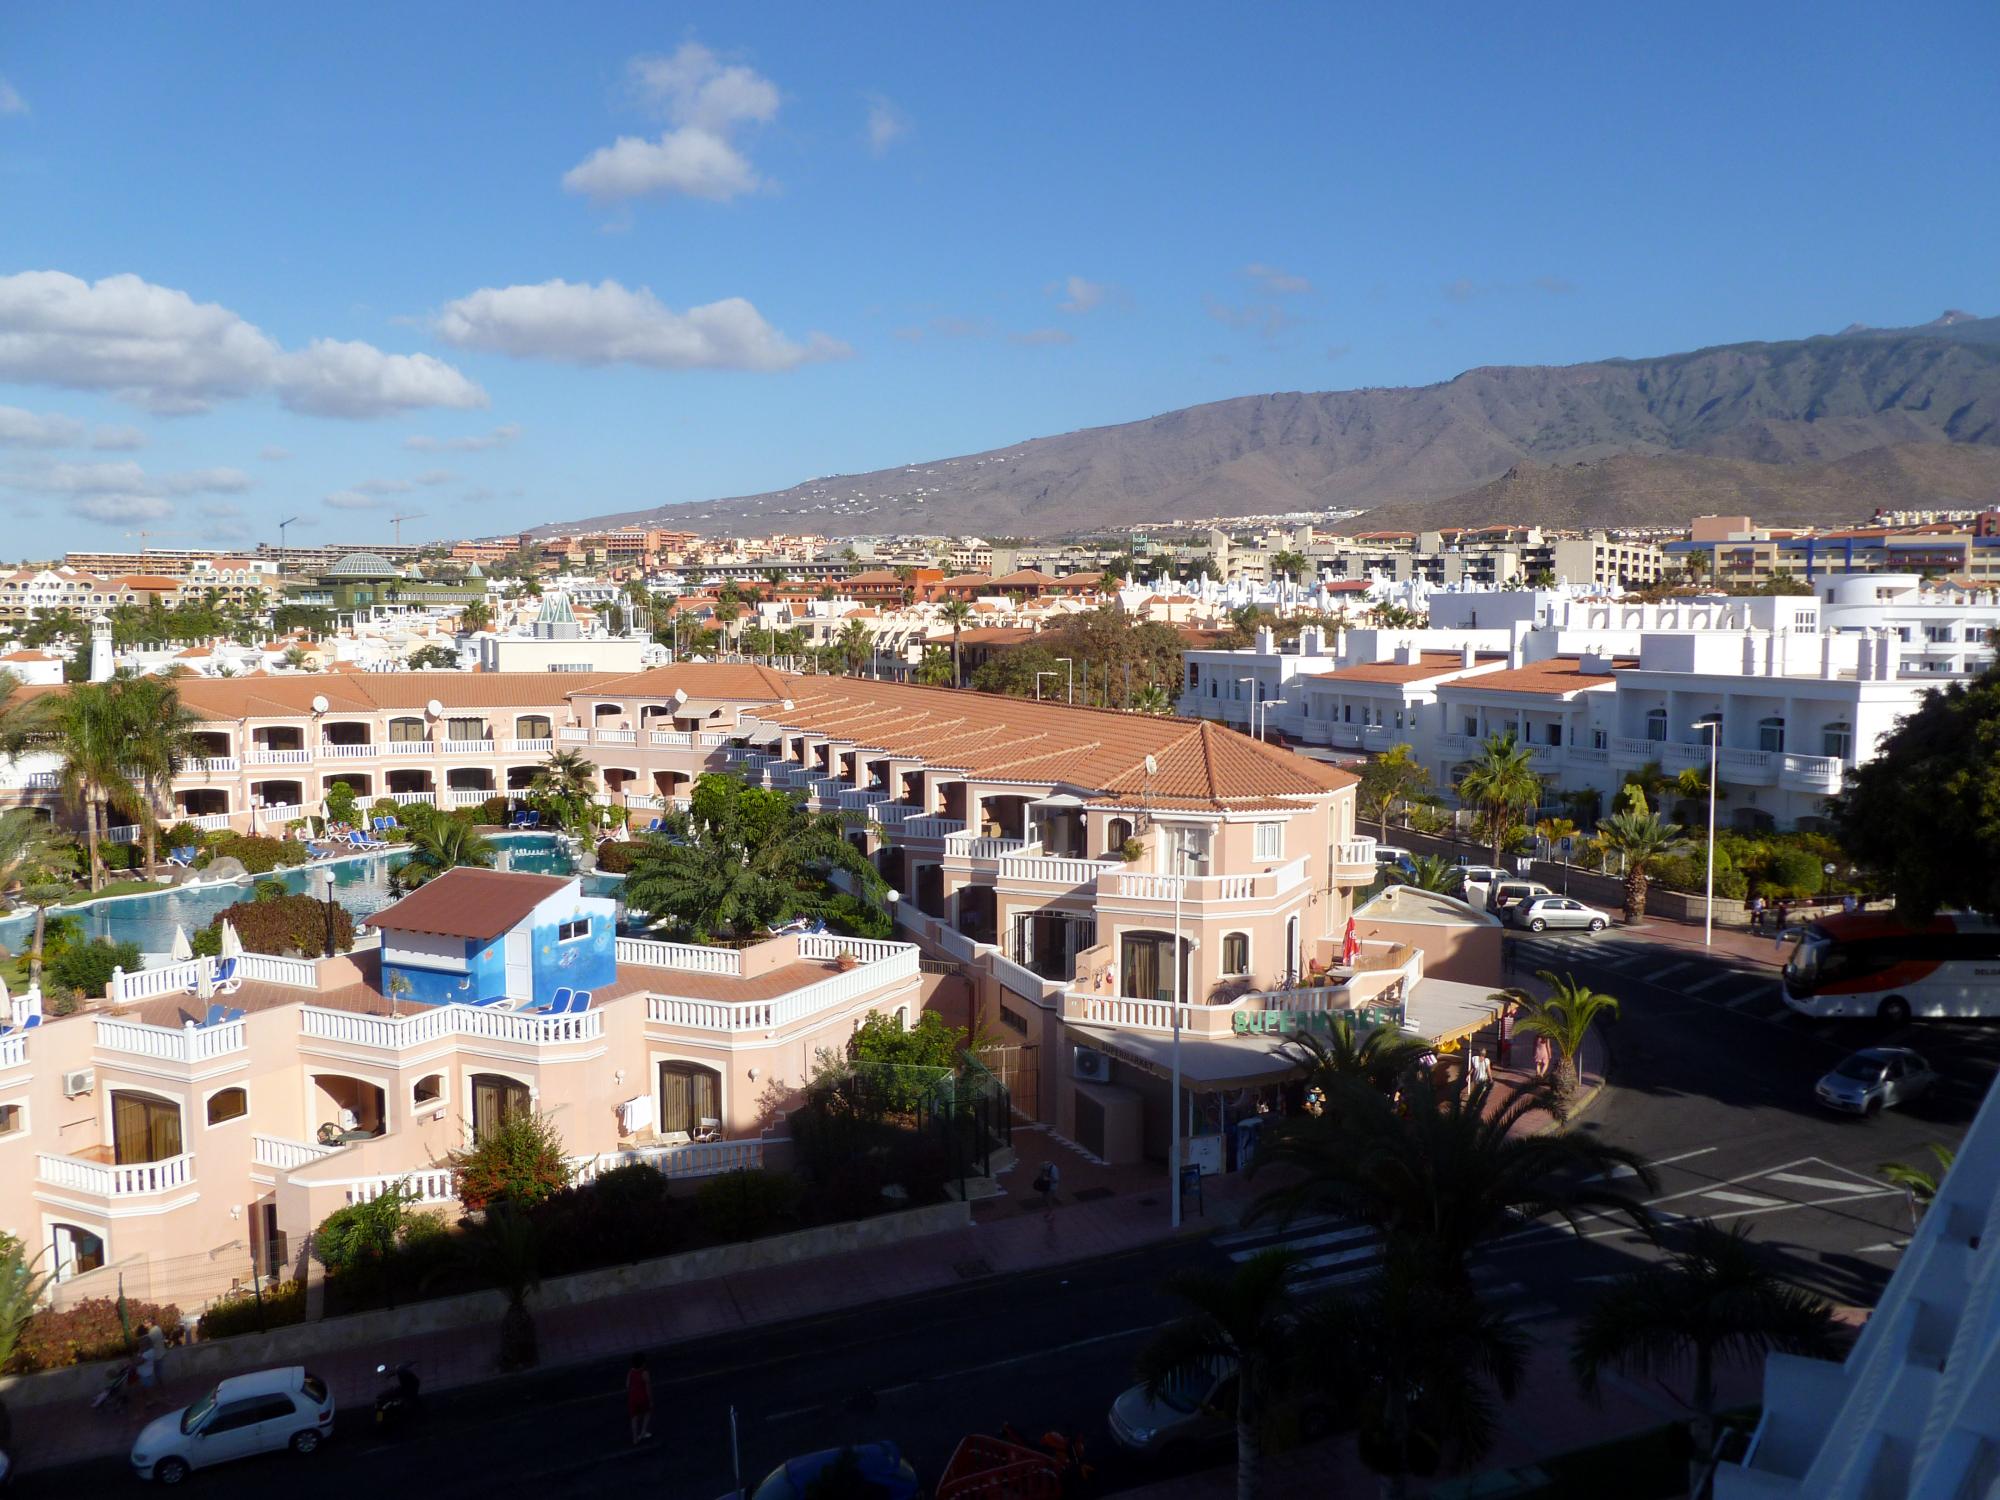  Canary Islands - Room View #1